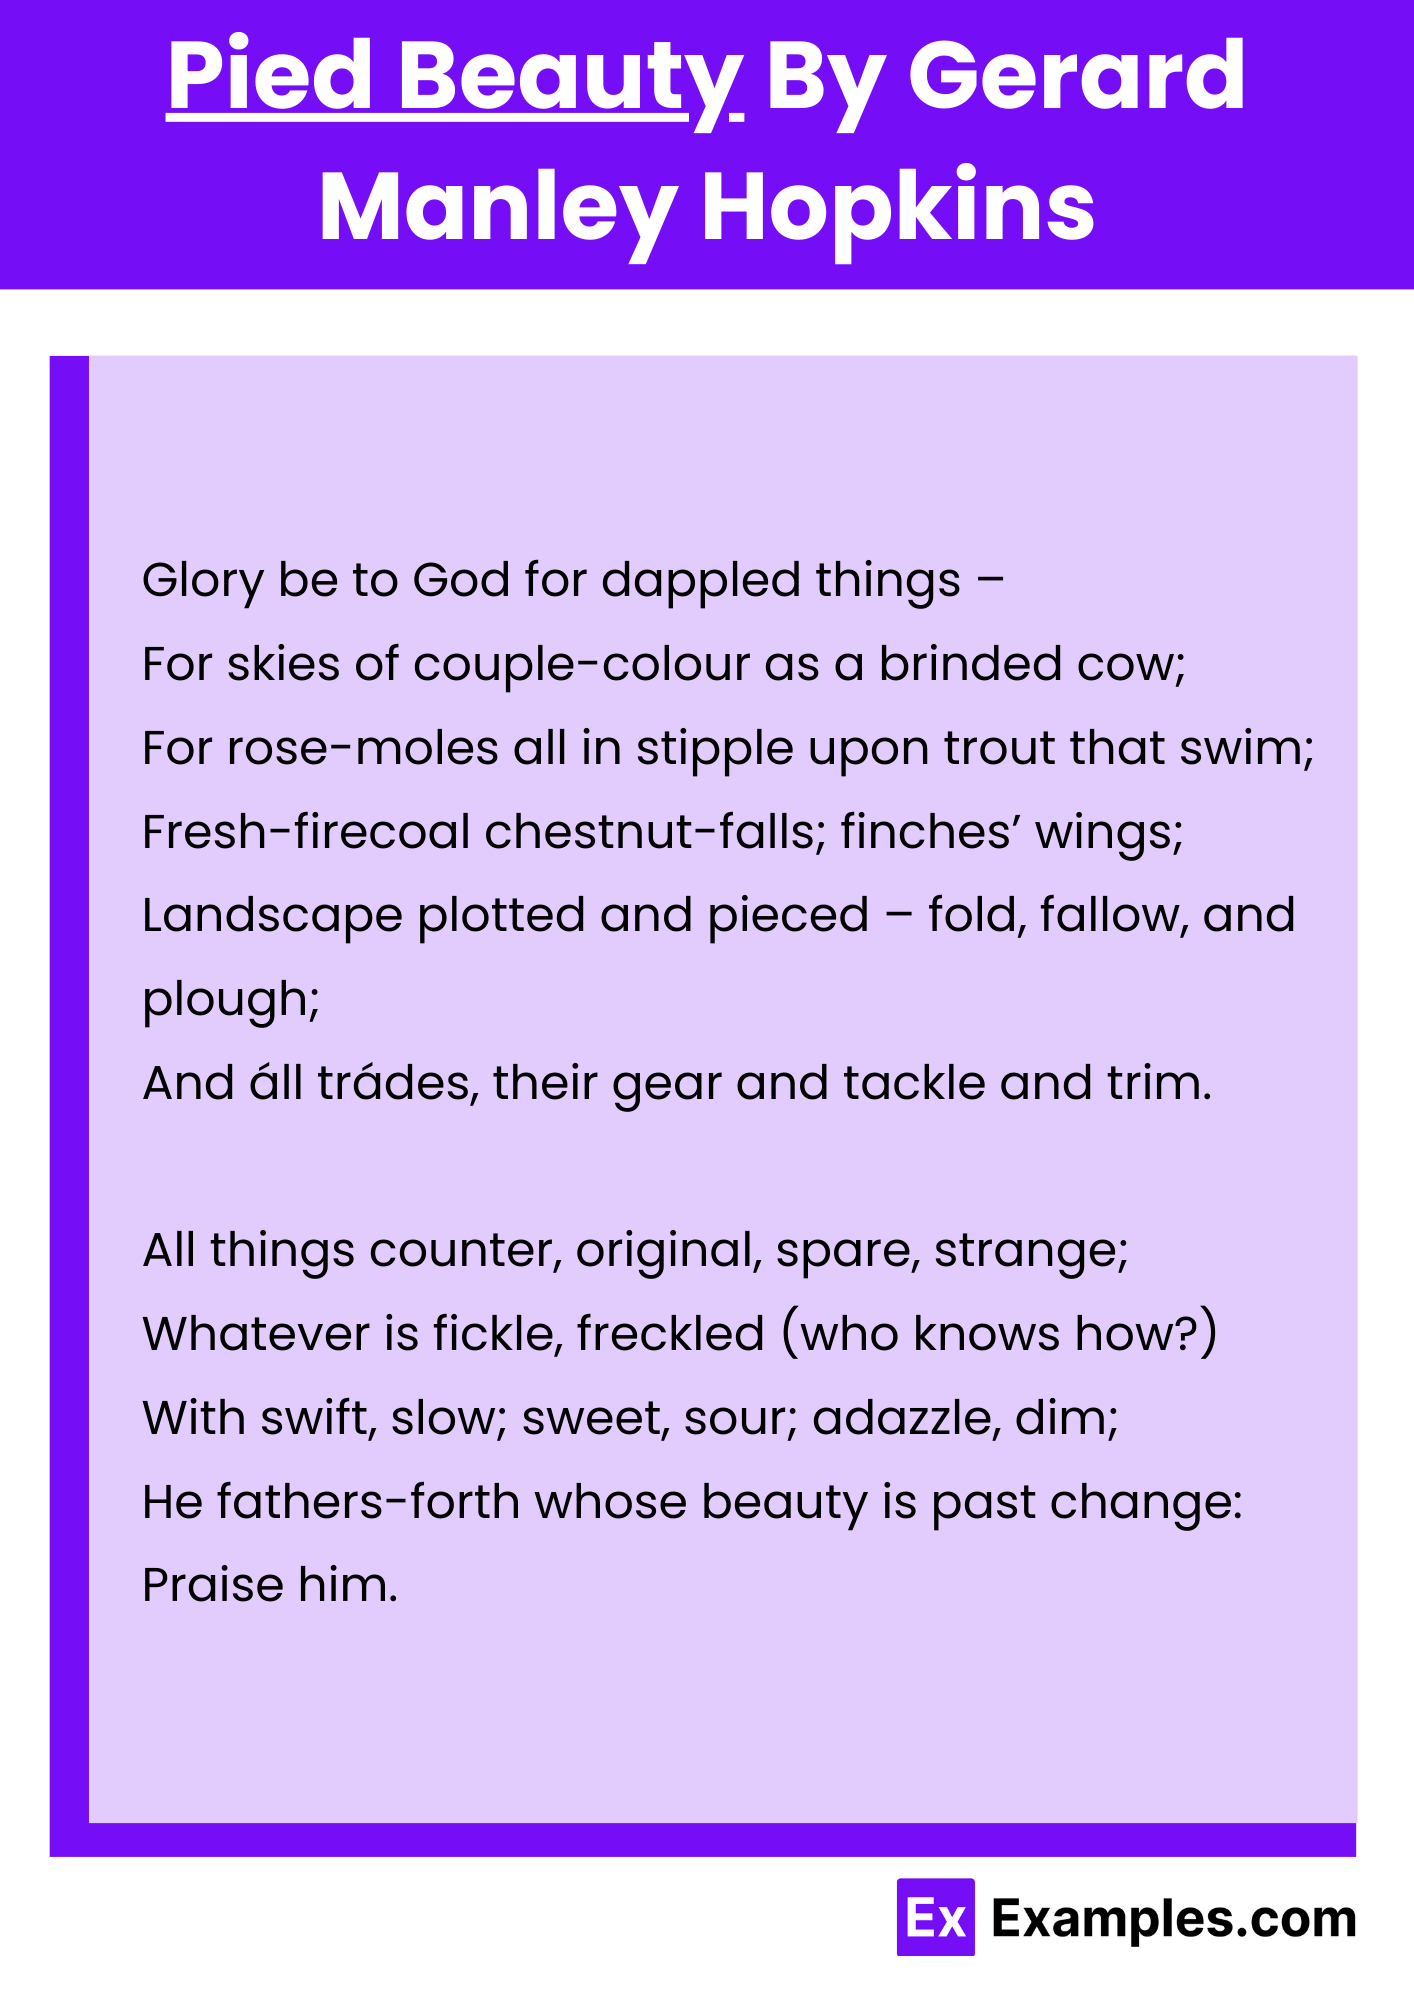 Pied Beauty By Gerard Manley Hopkins